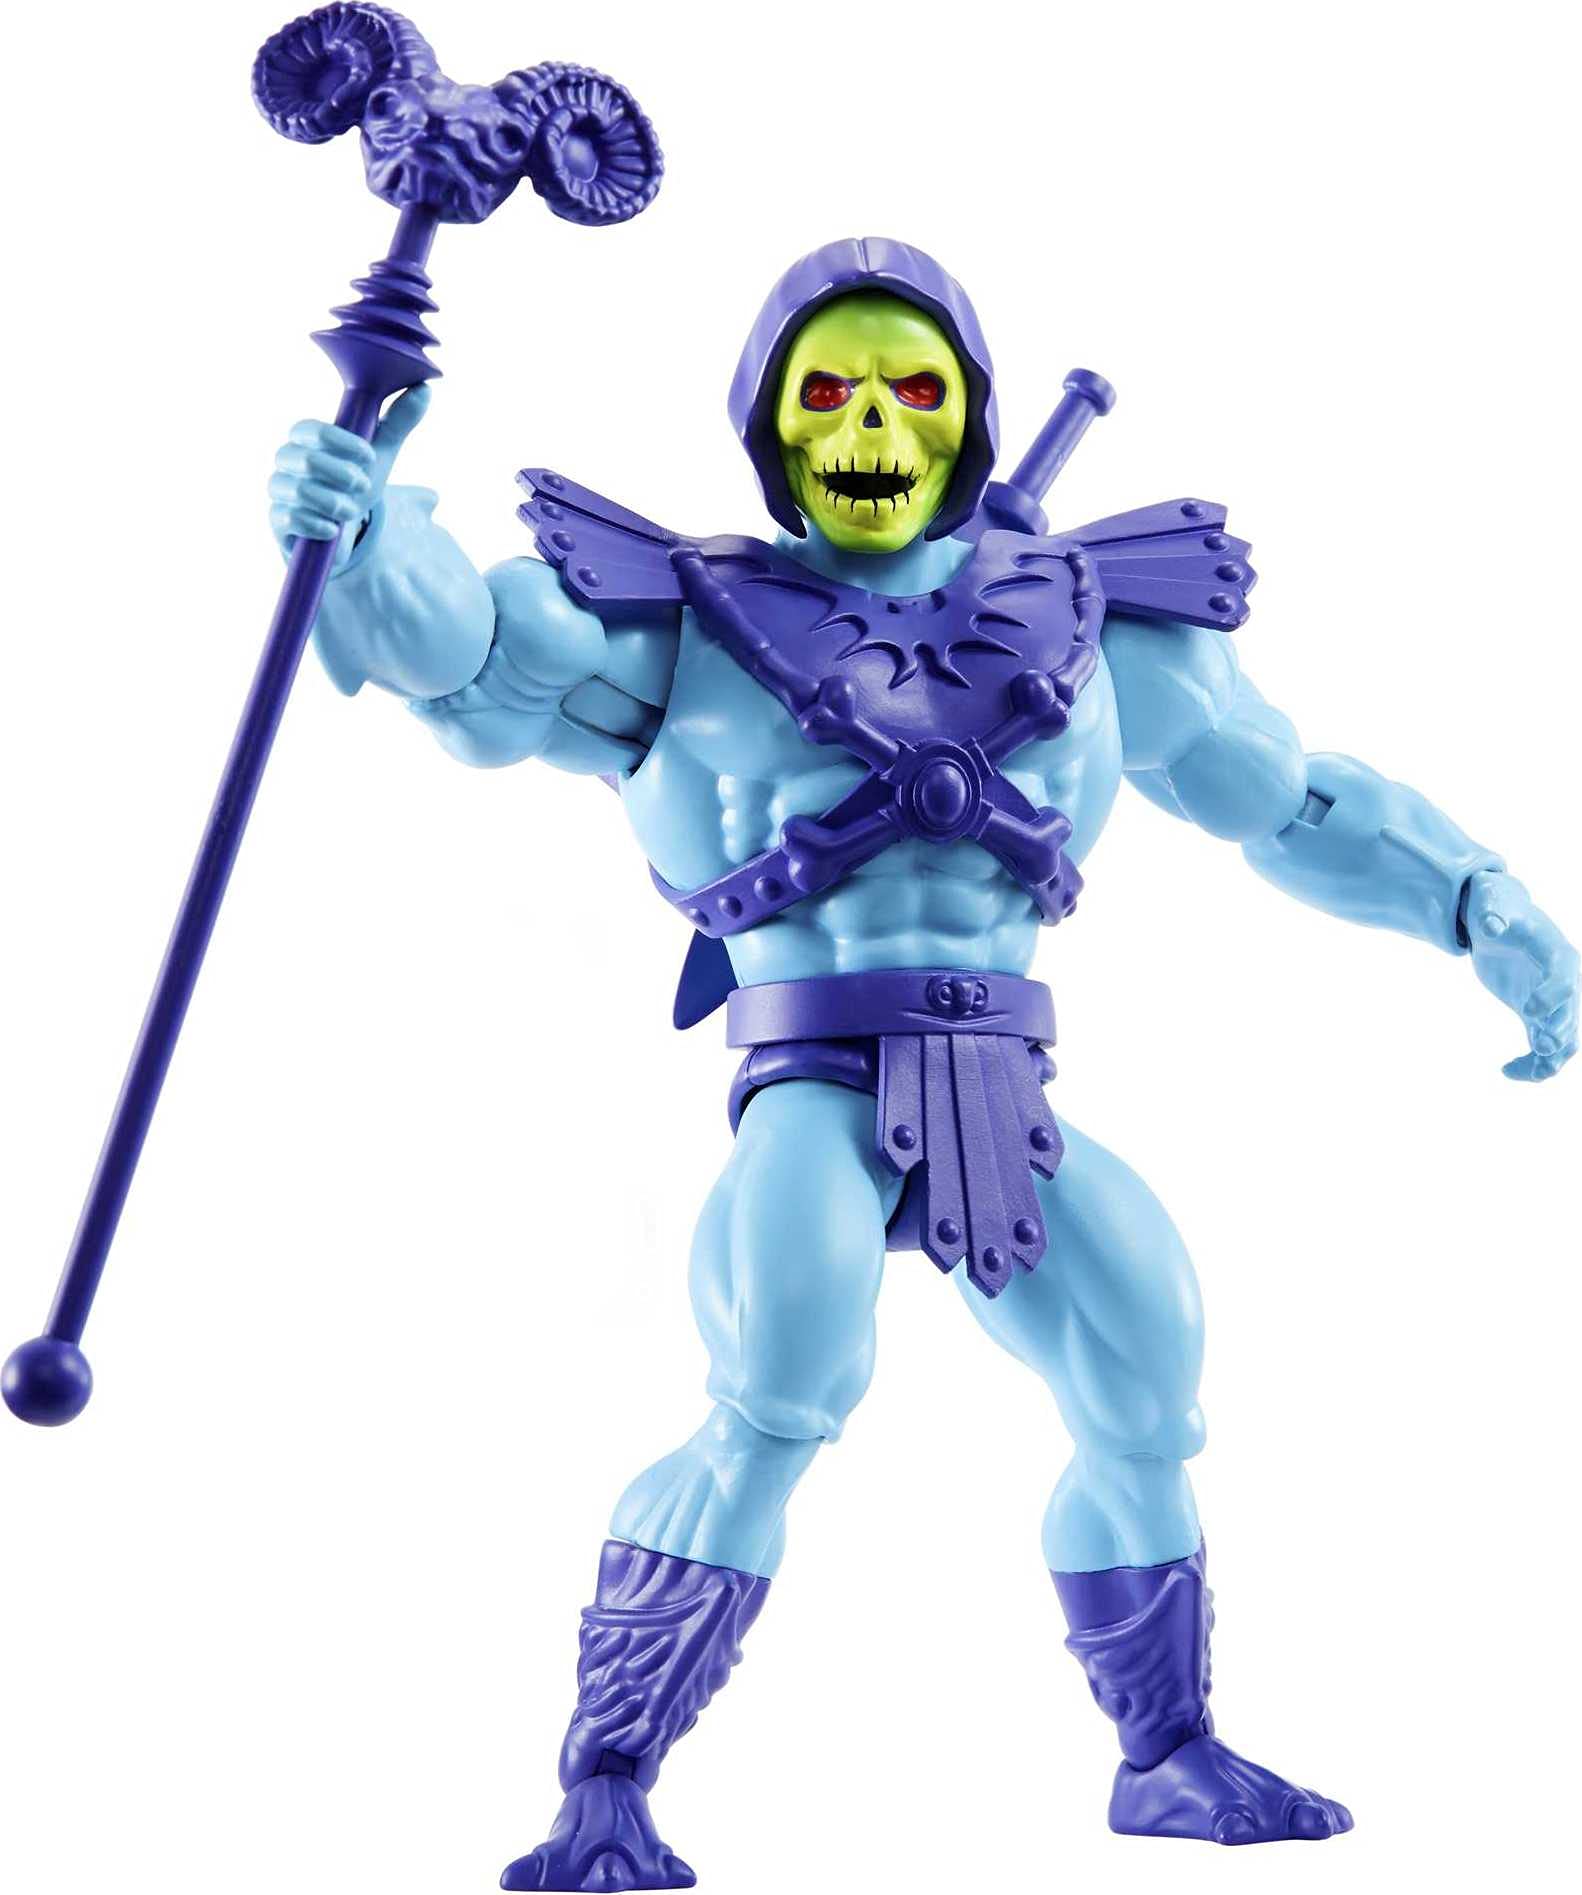 dawood zafar add pictures of skeletor from he man photo